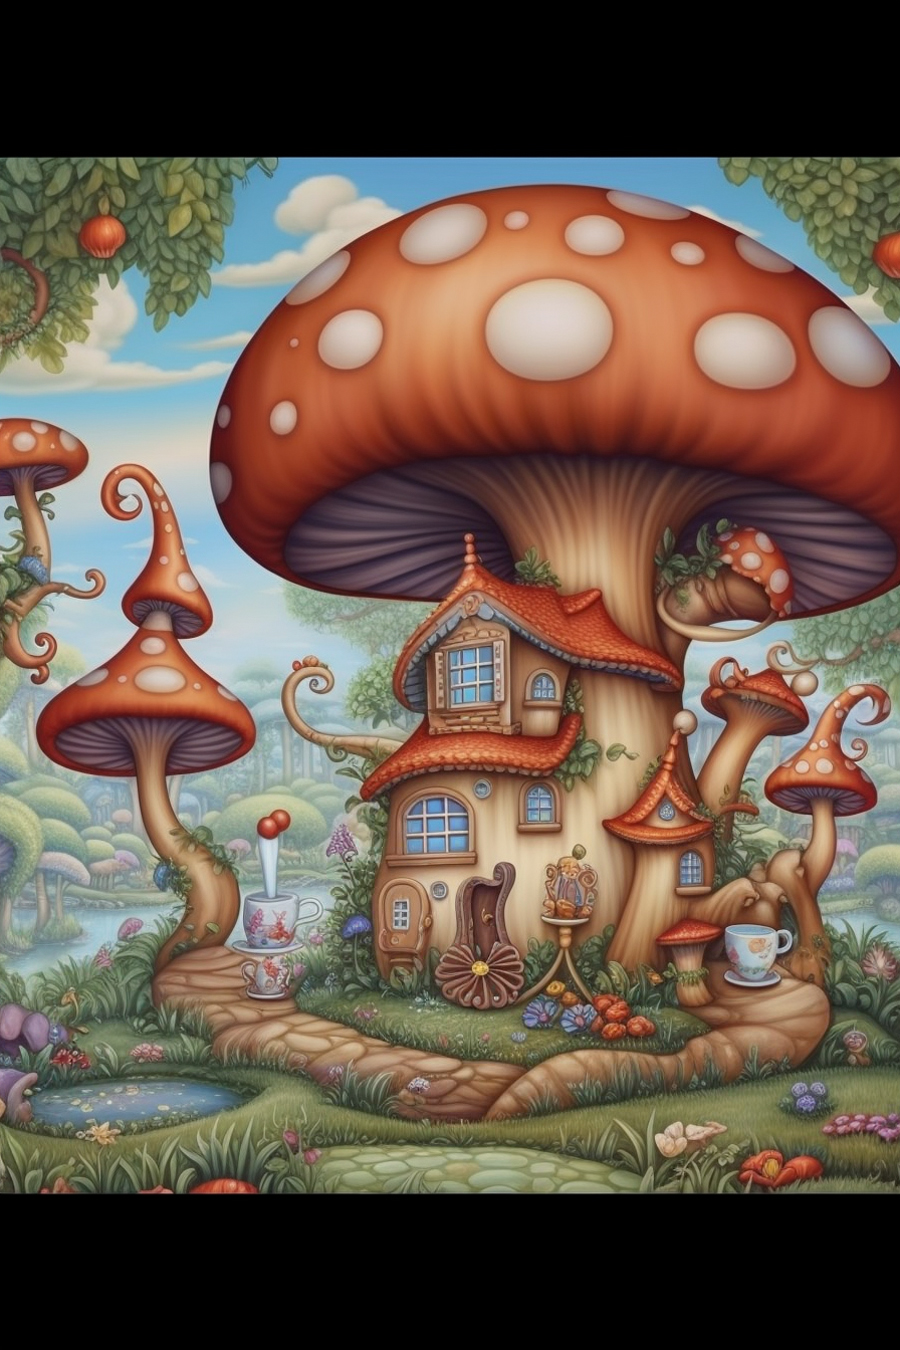 A painting of a mushroom house in the forest.